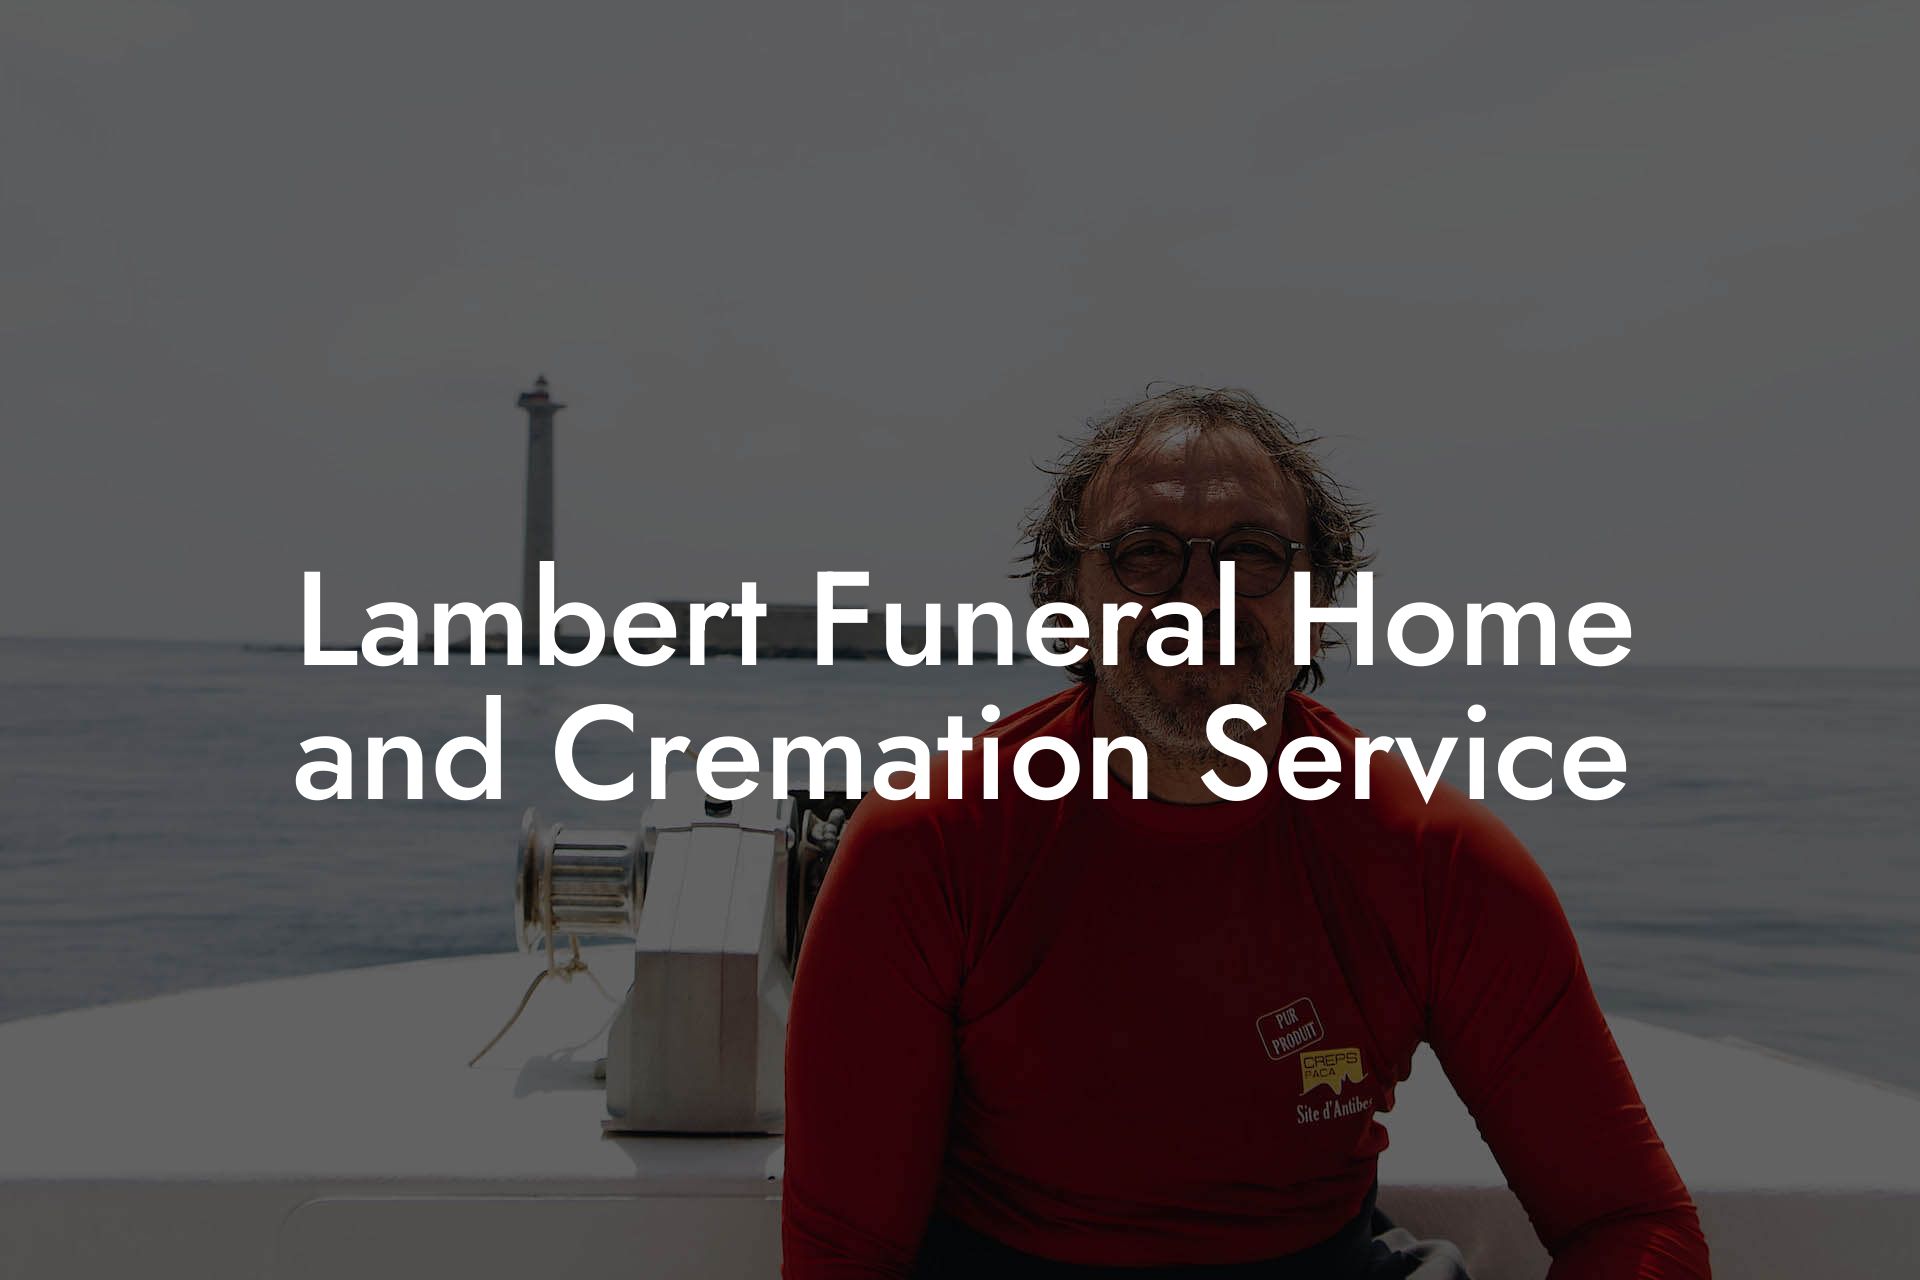 Lambert Funeral Home and Cremation Service